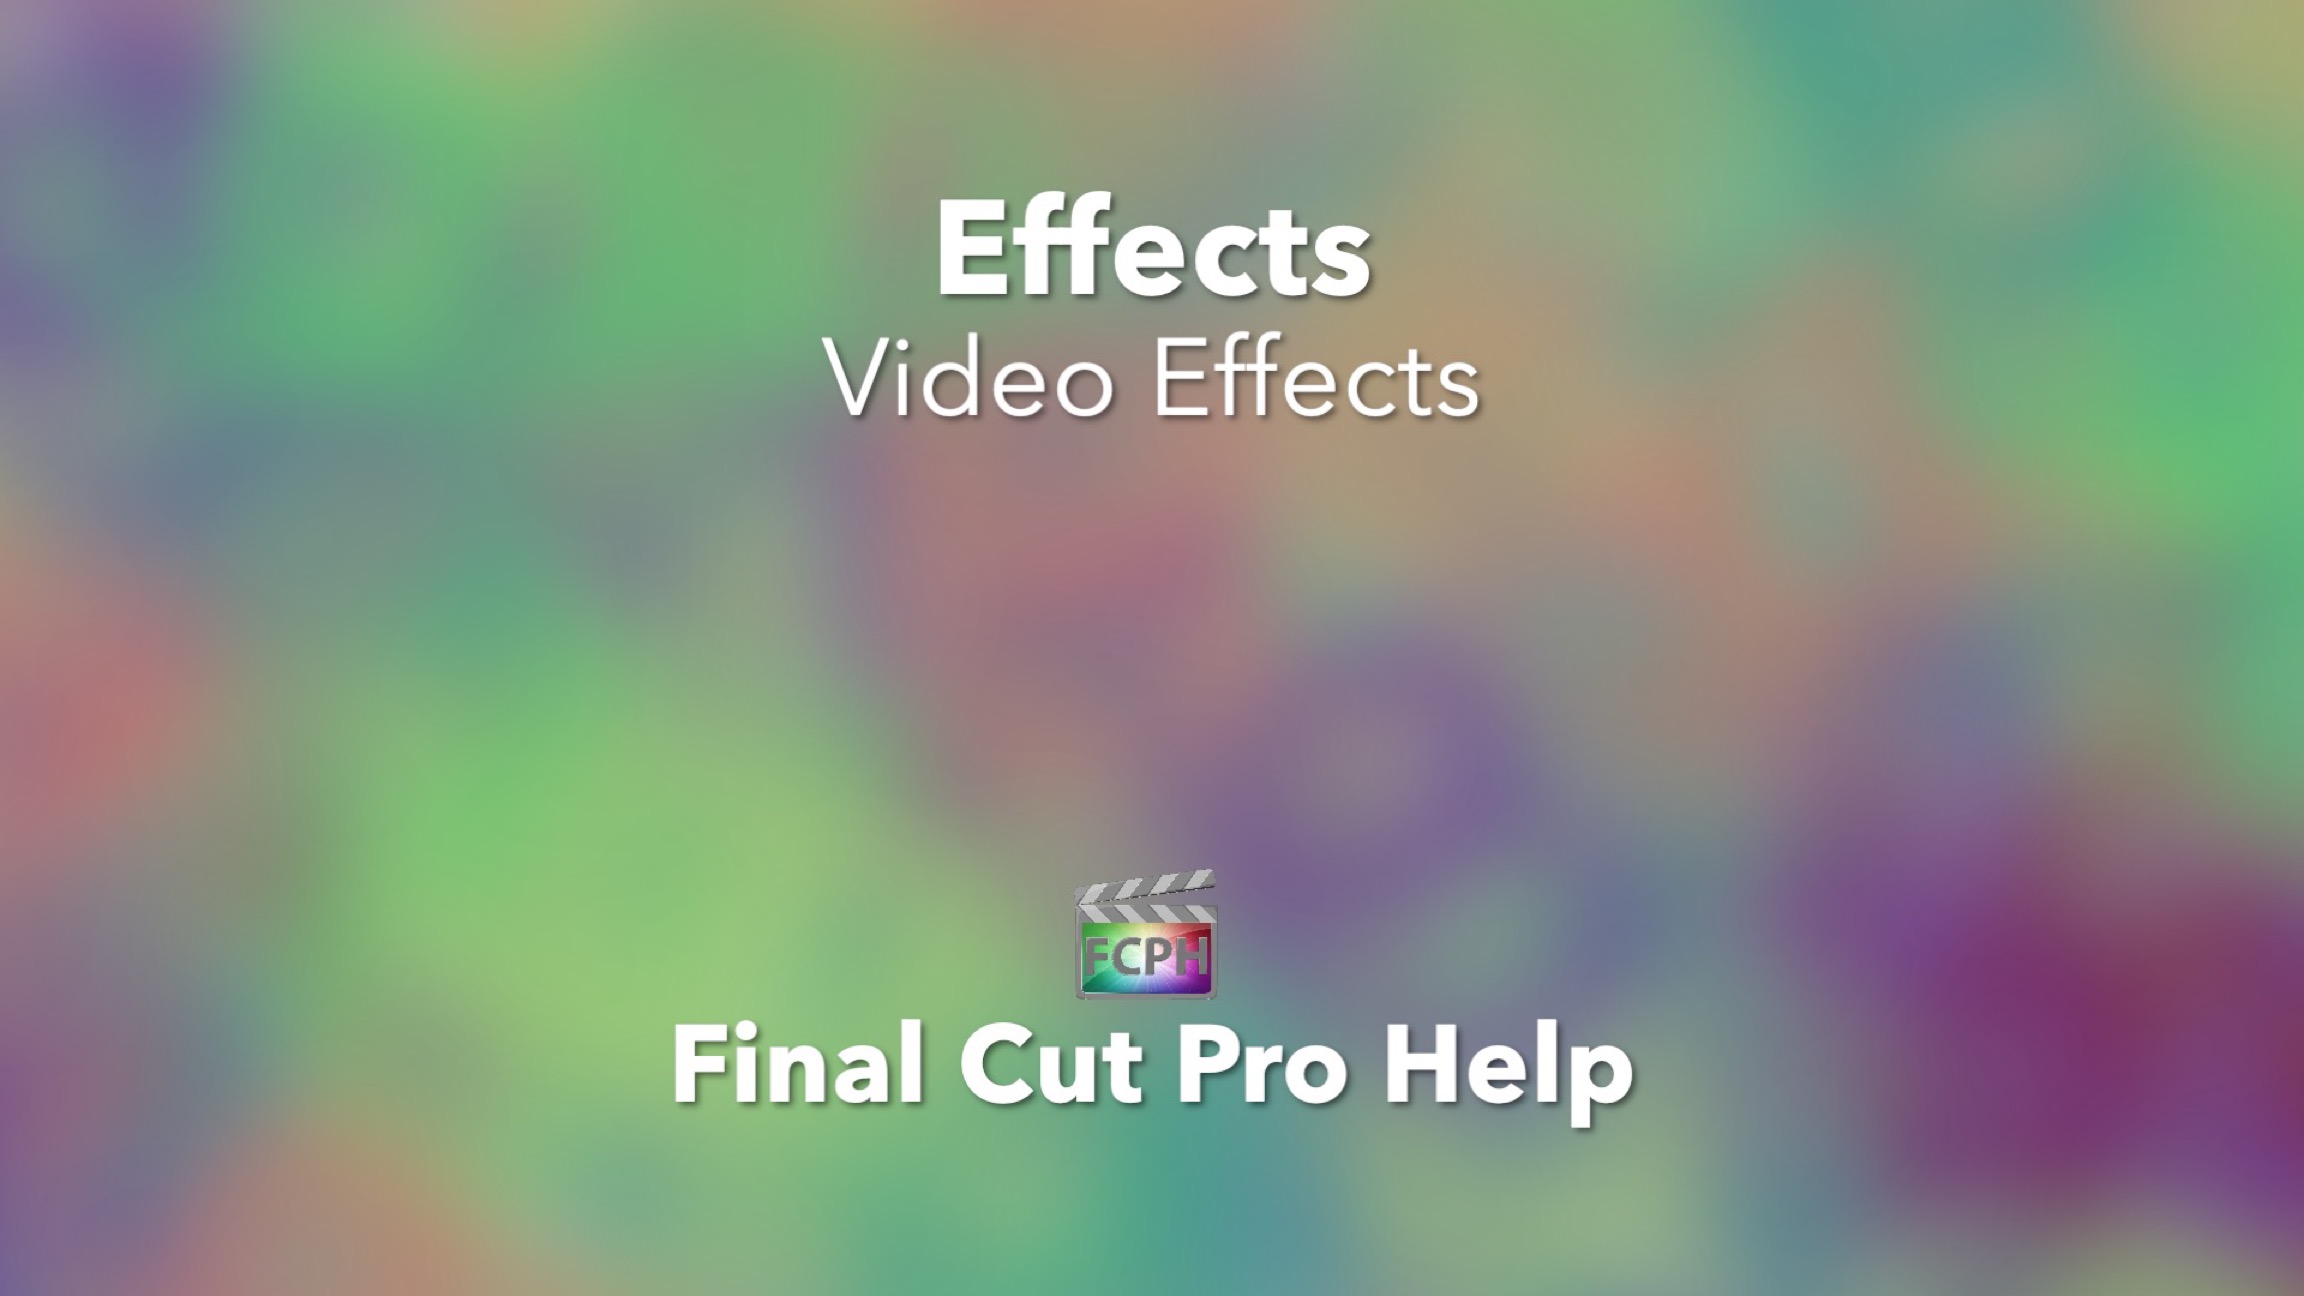 Effects Video Effects